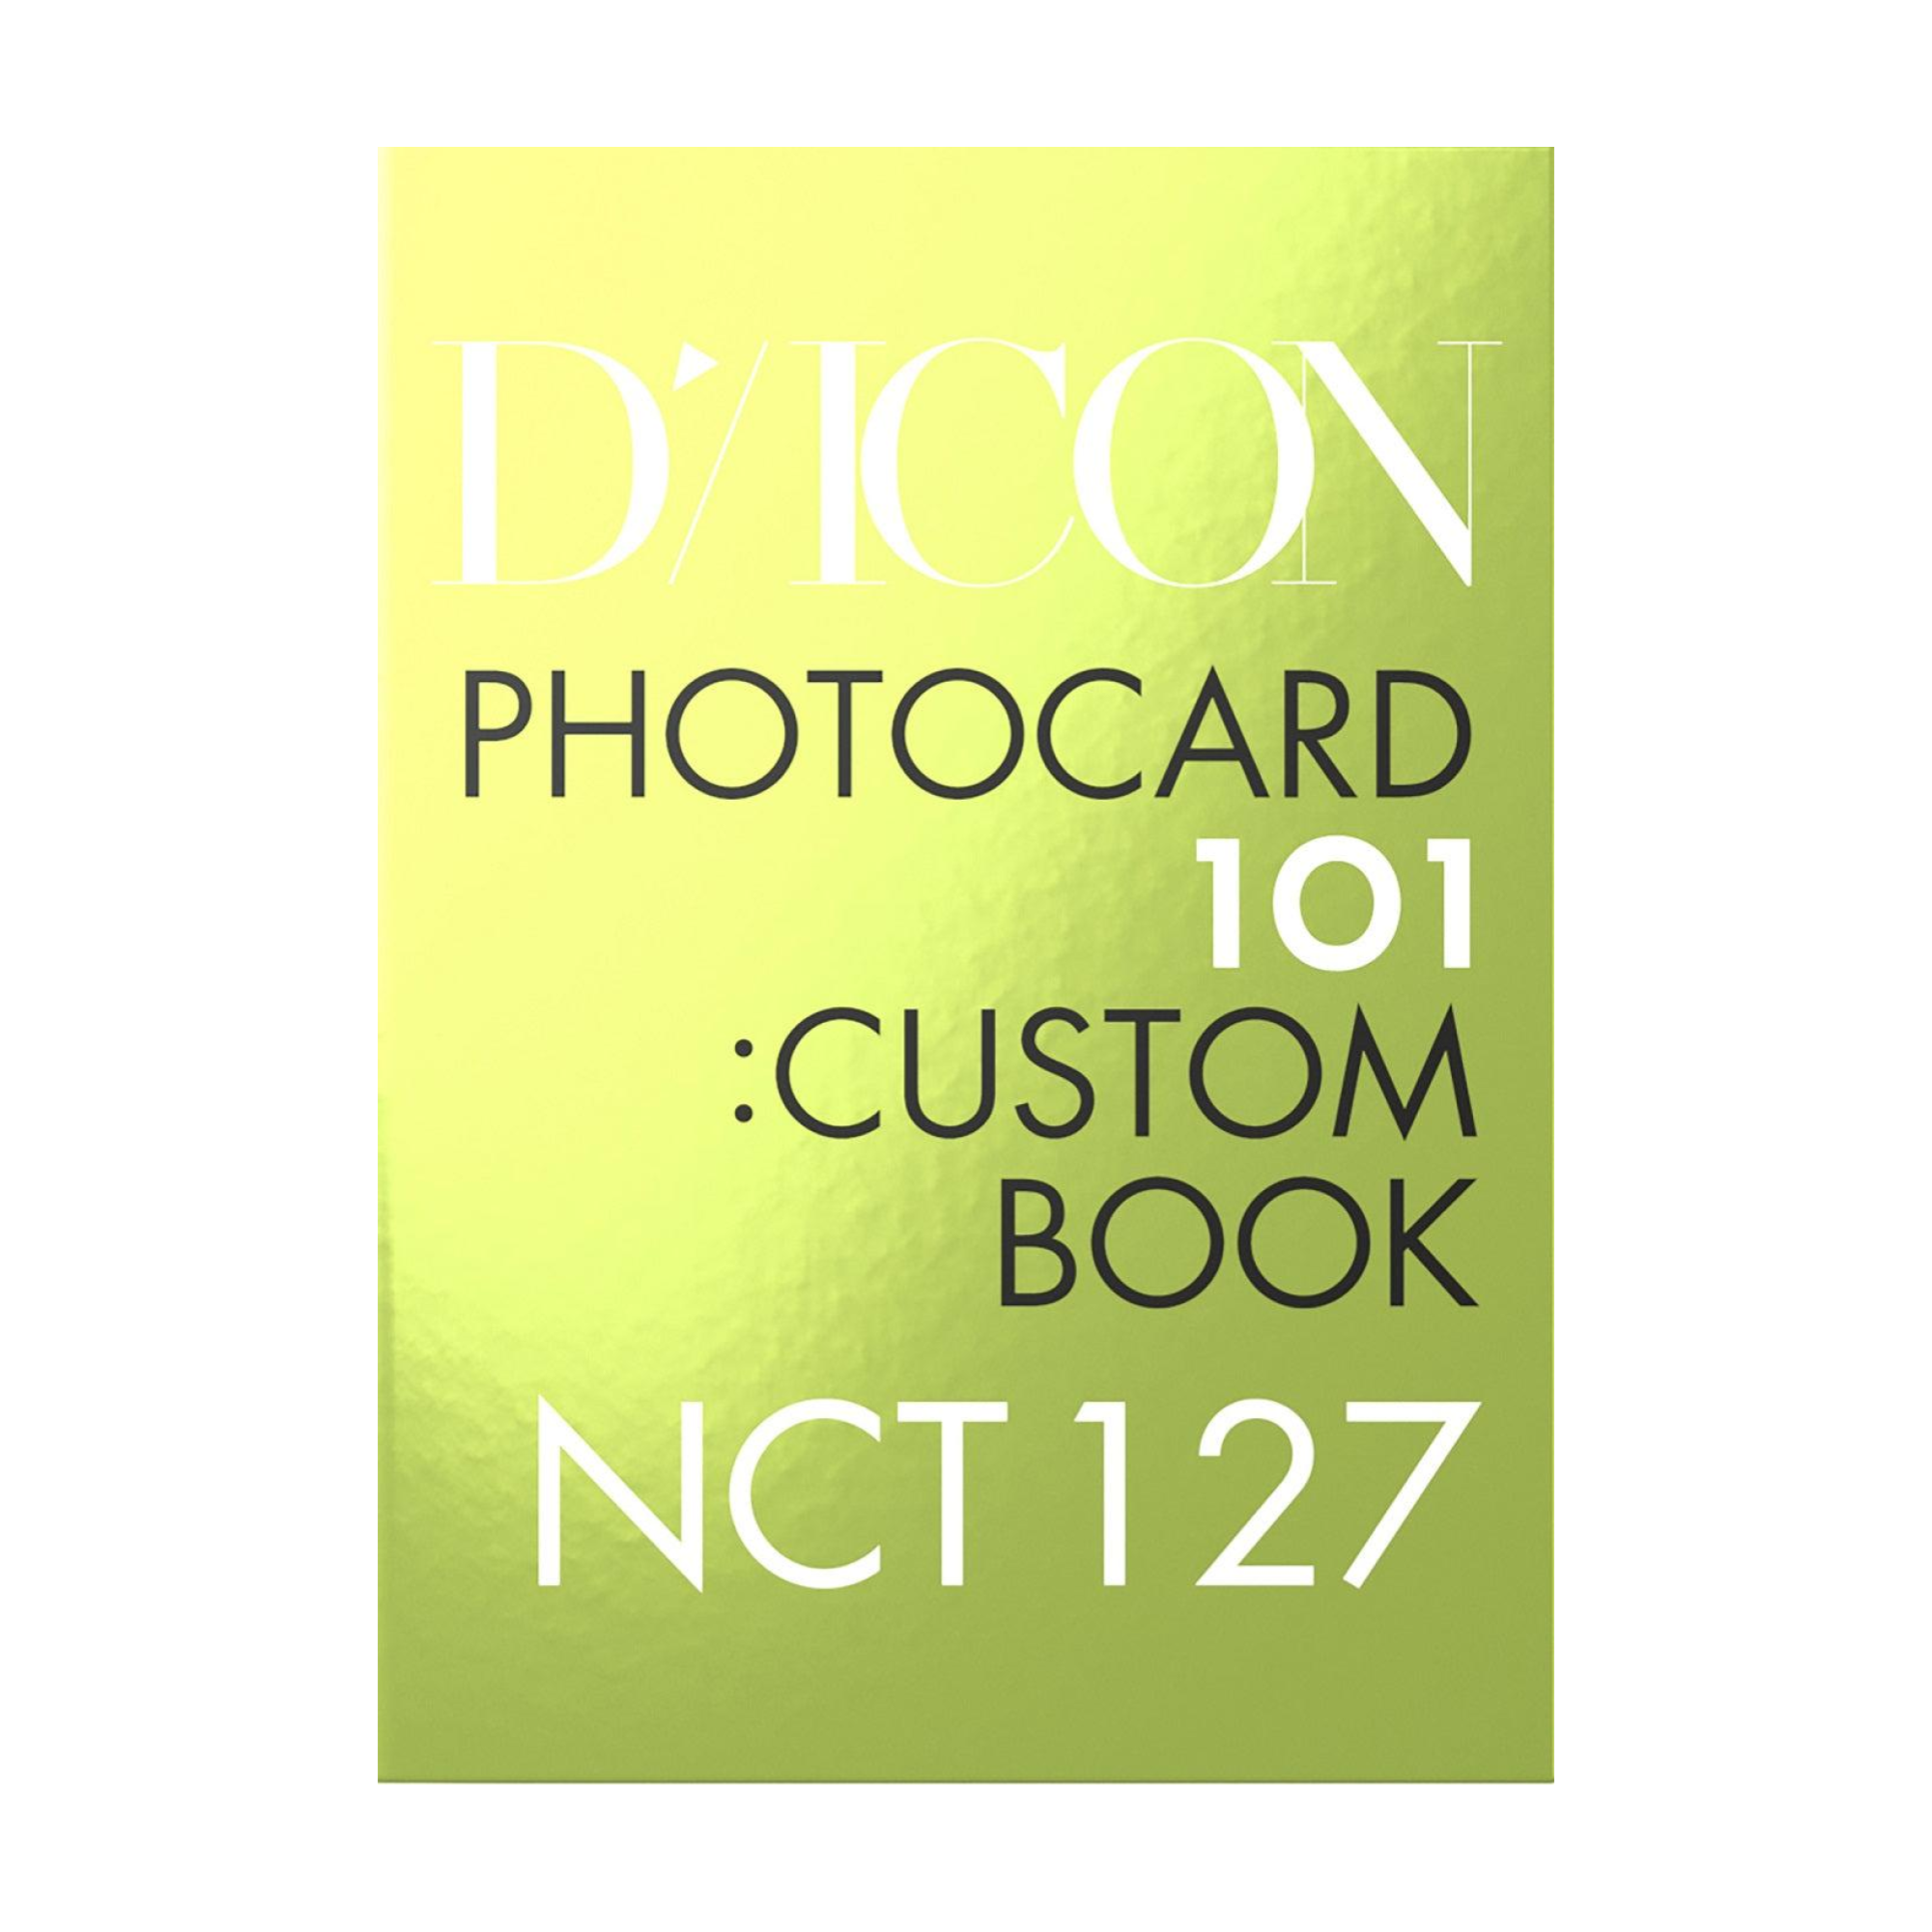 DICON NCT 127 PHOTOCARD 101:CUSTOM BOOK / CITY of ANGEL NCT 127 since 2019(in Seoul-LA)